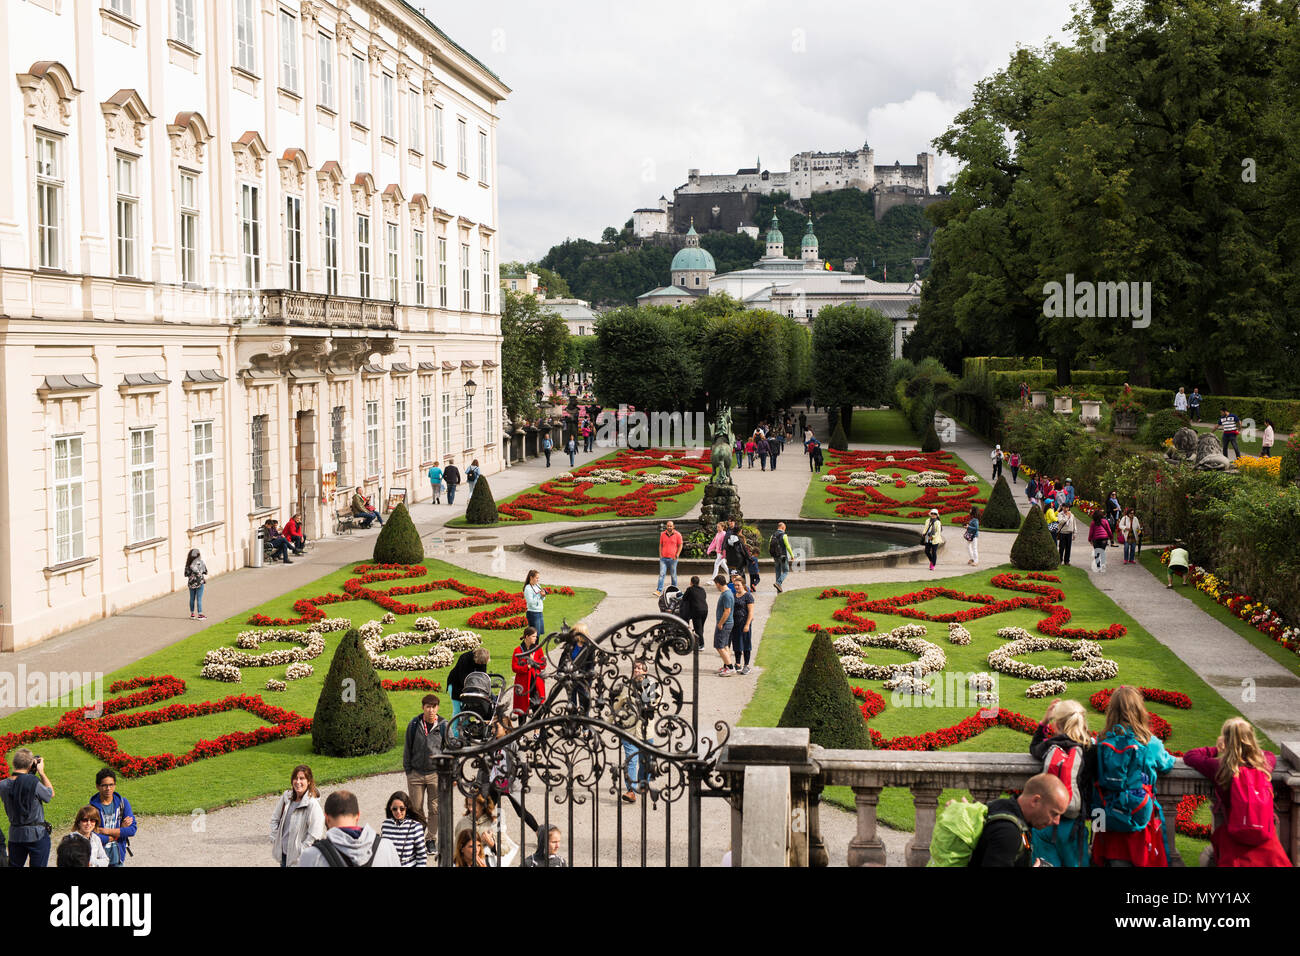 The garden at the Mirabell palace in Salzburg, Austria, one of the famous filming locations for 'Do Re Mi' in the Sound of Music movie. Stock Photo